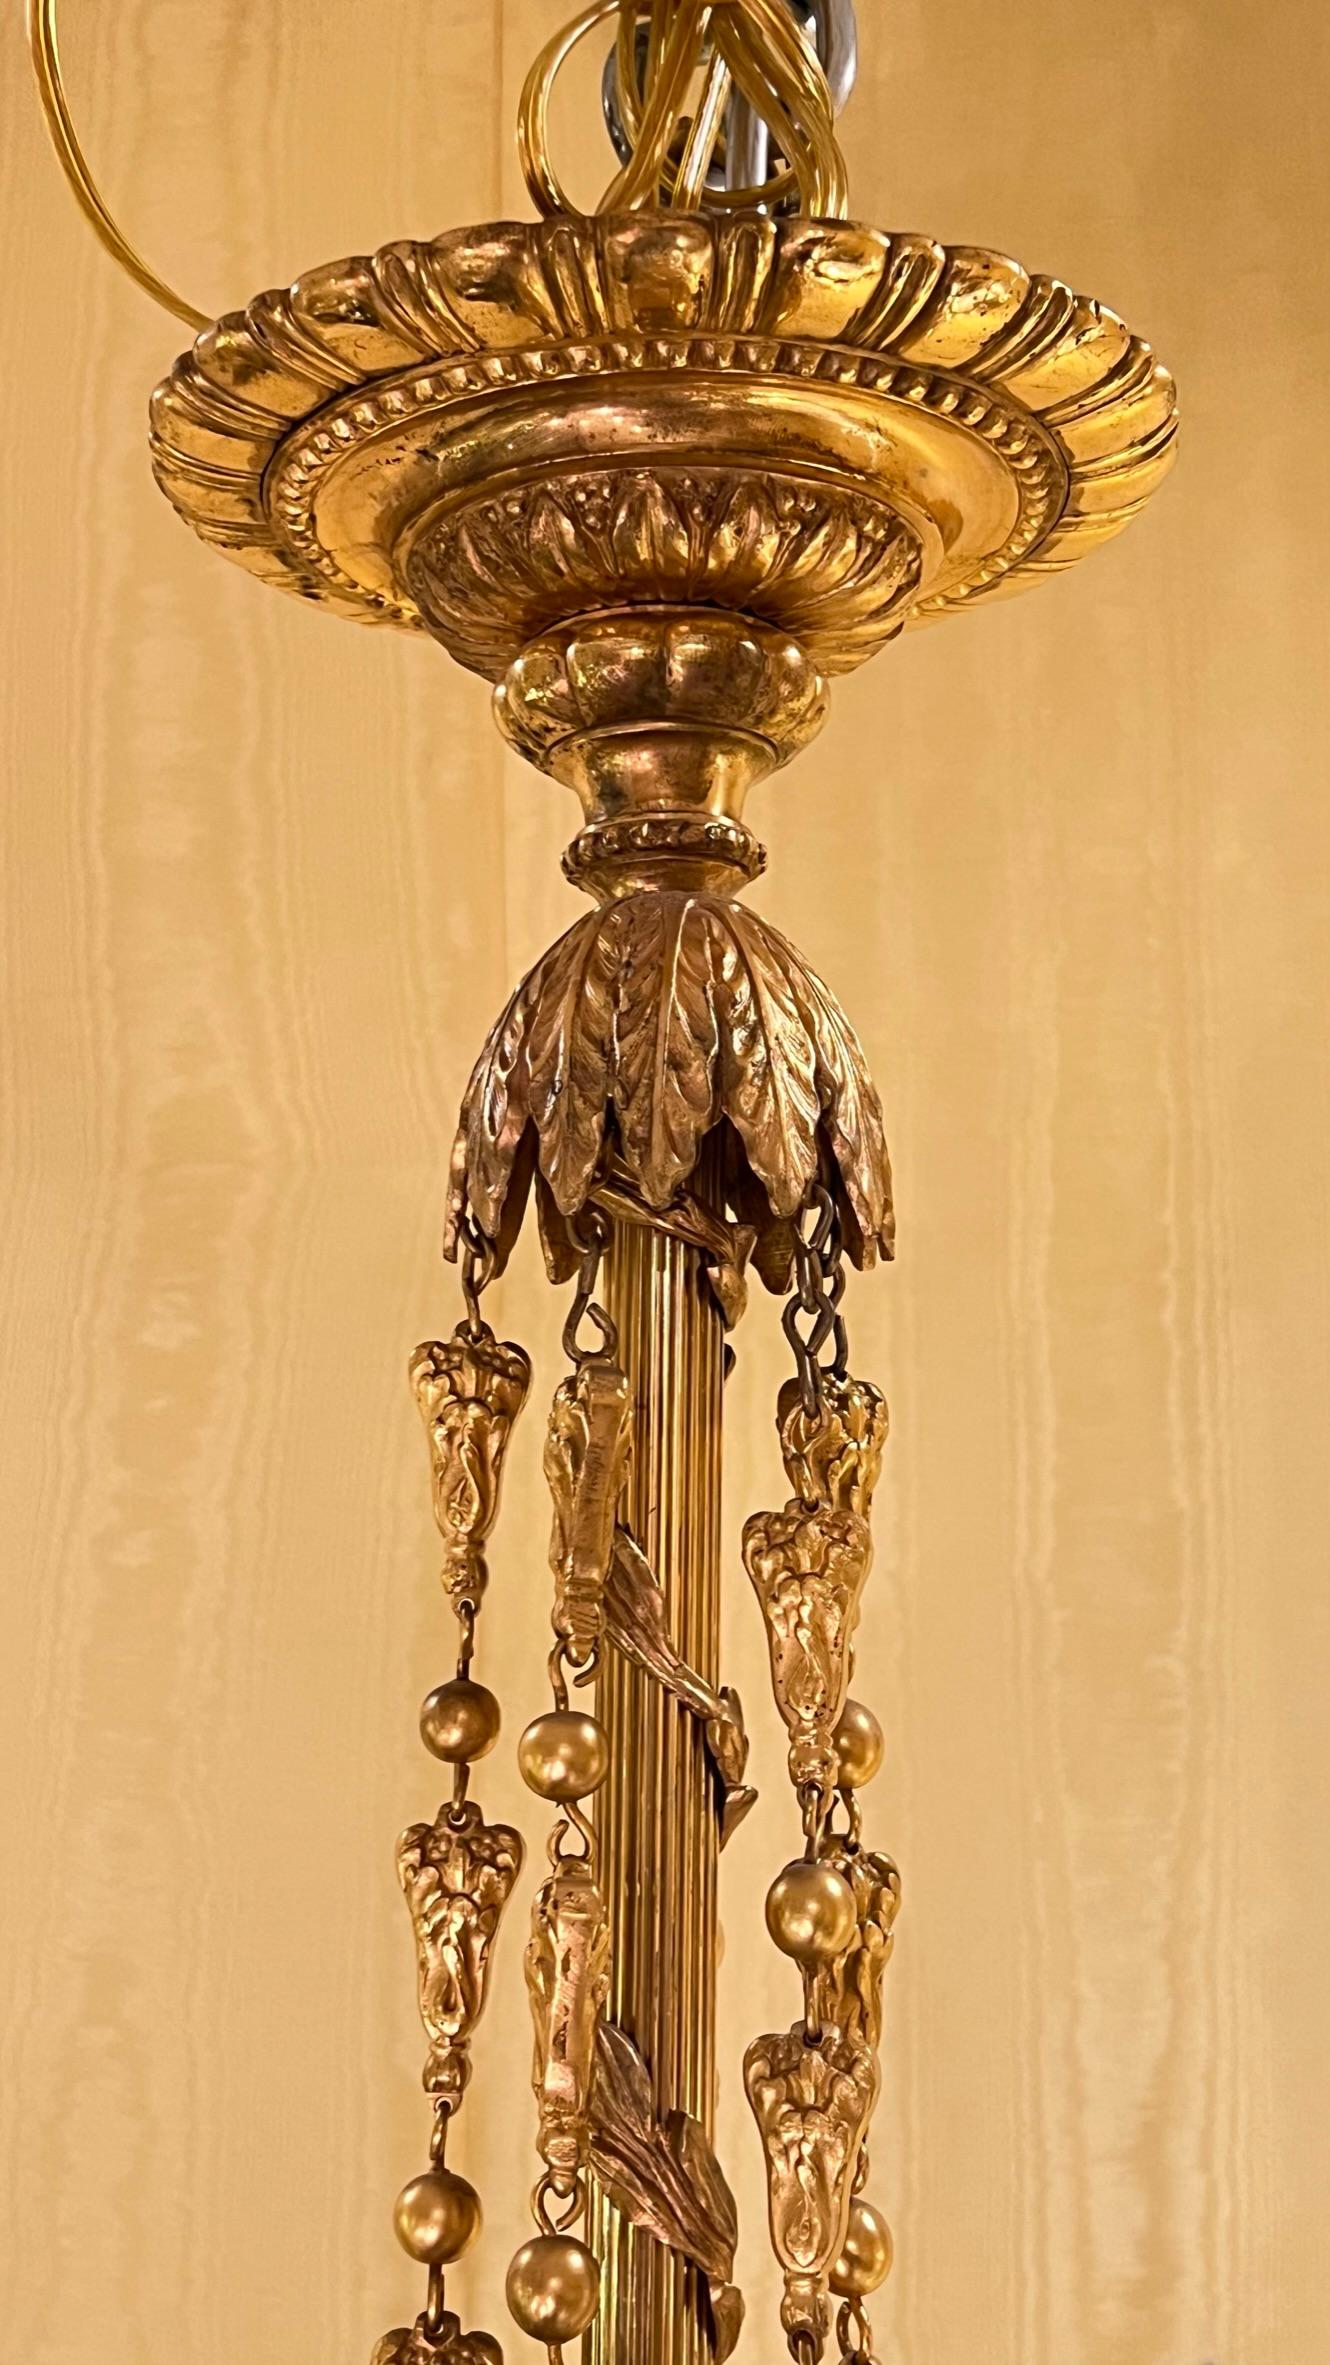 19th century French Louis XVI style ten-light gilt bronze chandelier in the manner of Pierre Gouthiere.  With modern sockets and wiring, ready for installation.
